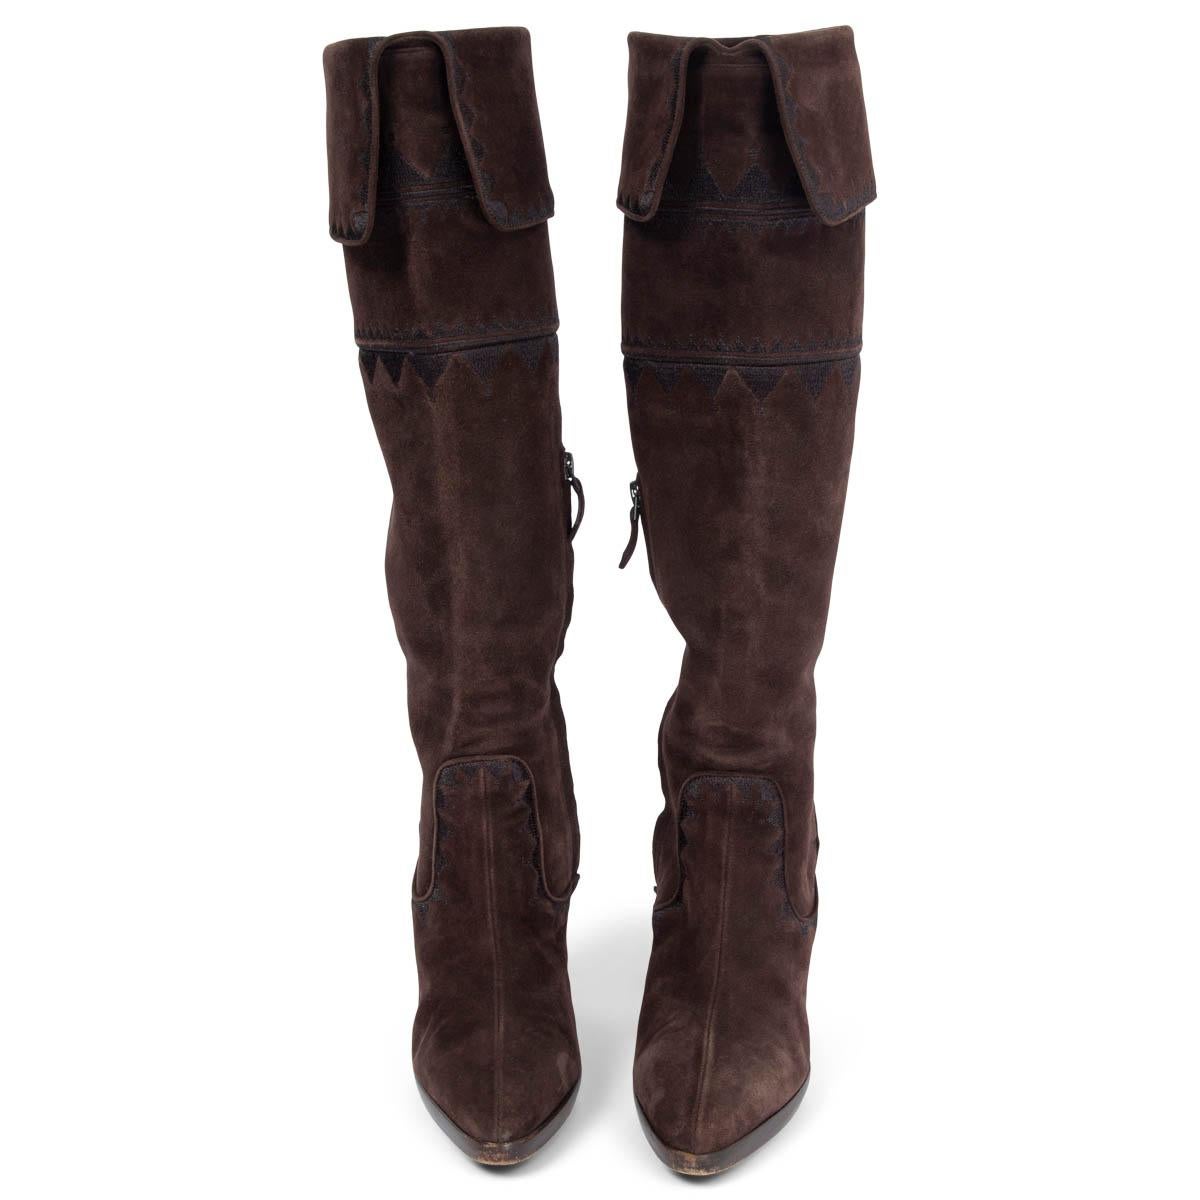 100% authentic Hermès knee-high boots in dark brown featuring a stacked heel, black complementing zigzag embroidery and a fold-over top. Open with an inner-zipper. Have been worn with overall light signs of use and wear to the tips. Generally in